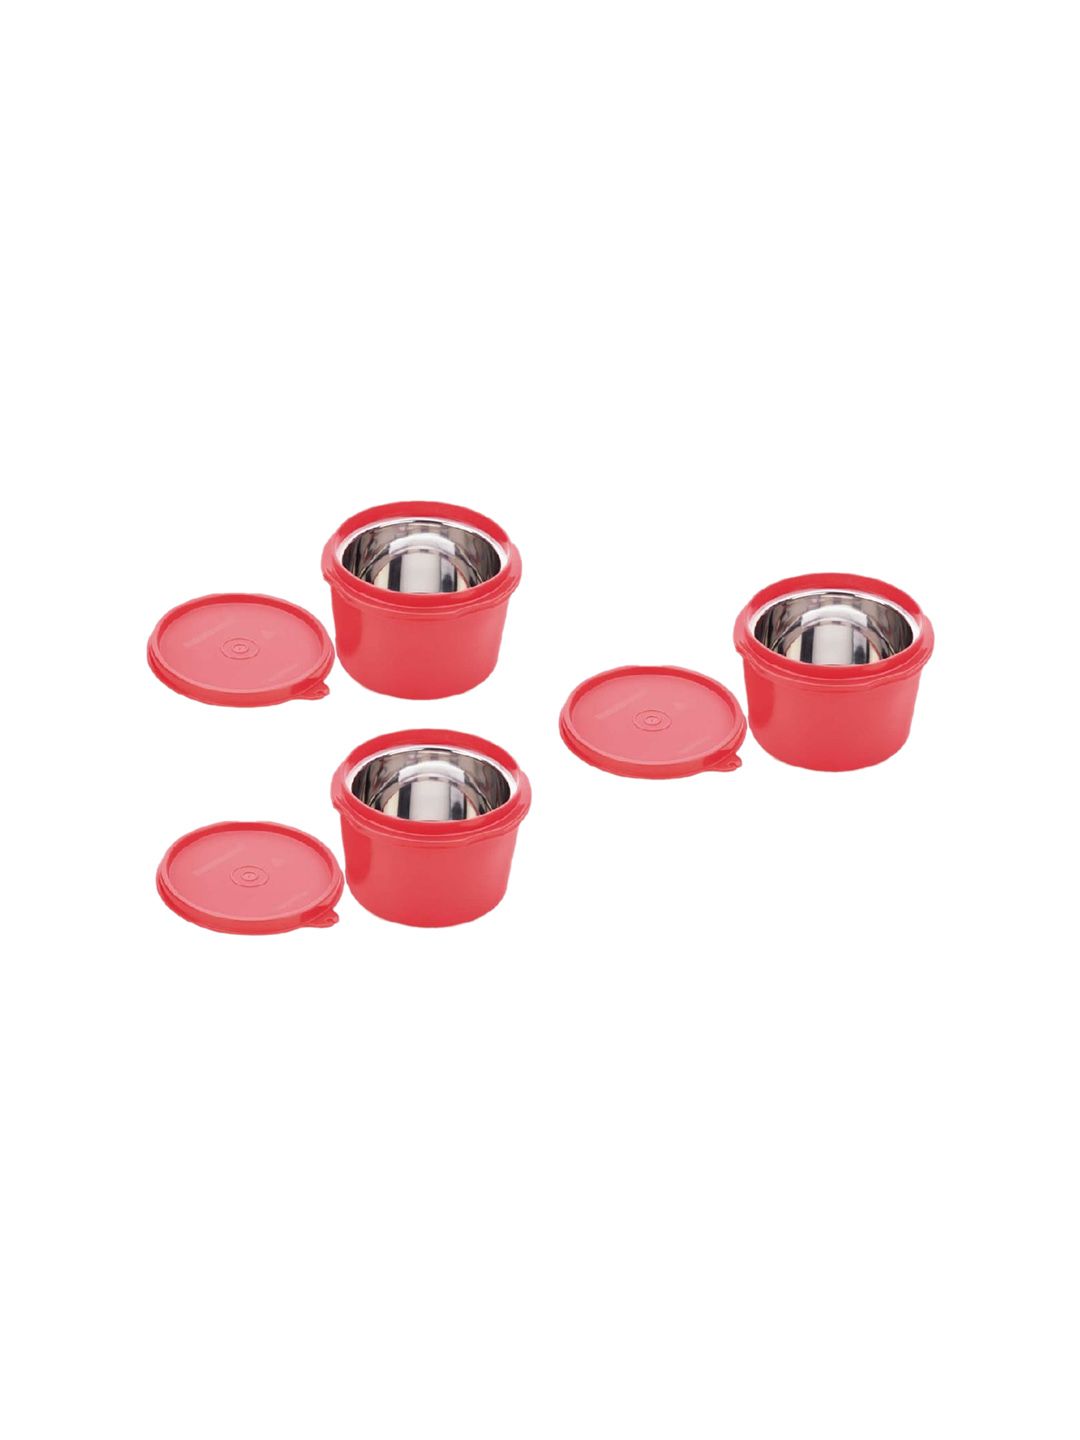 SignoraWare Set Of 3 Red Solid Food Container 500ml Price in India